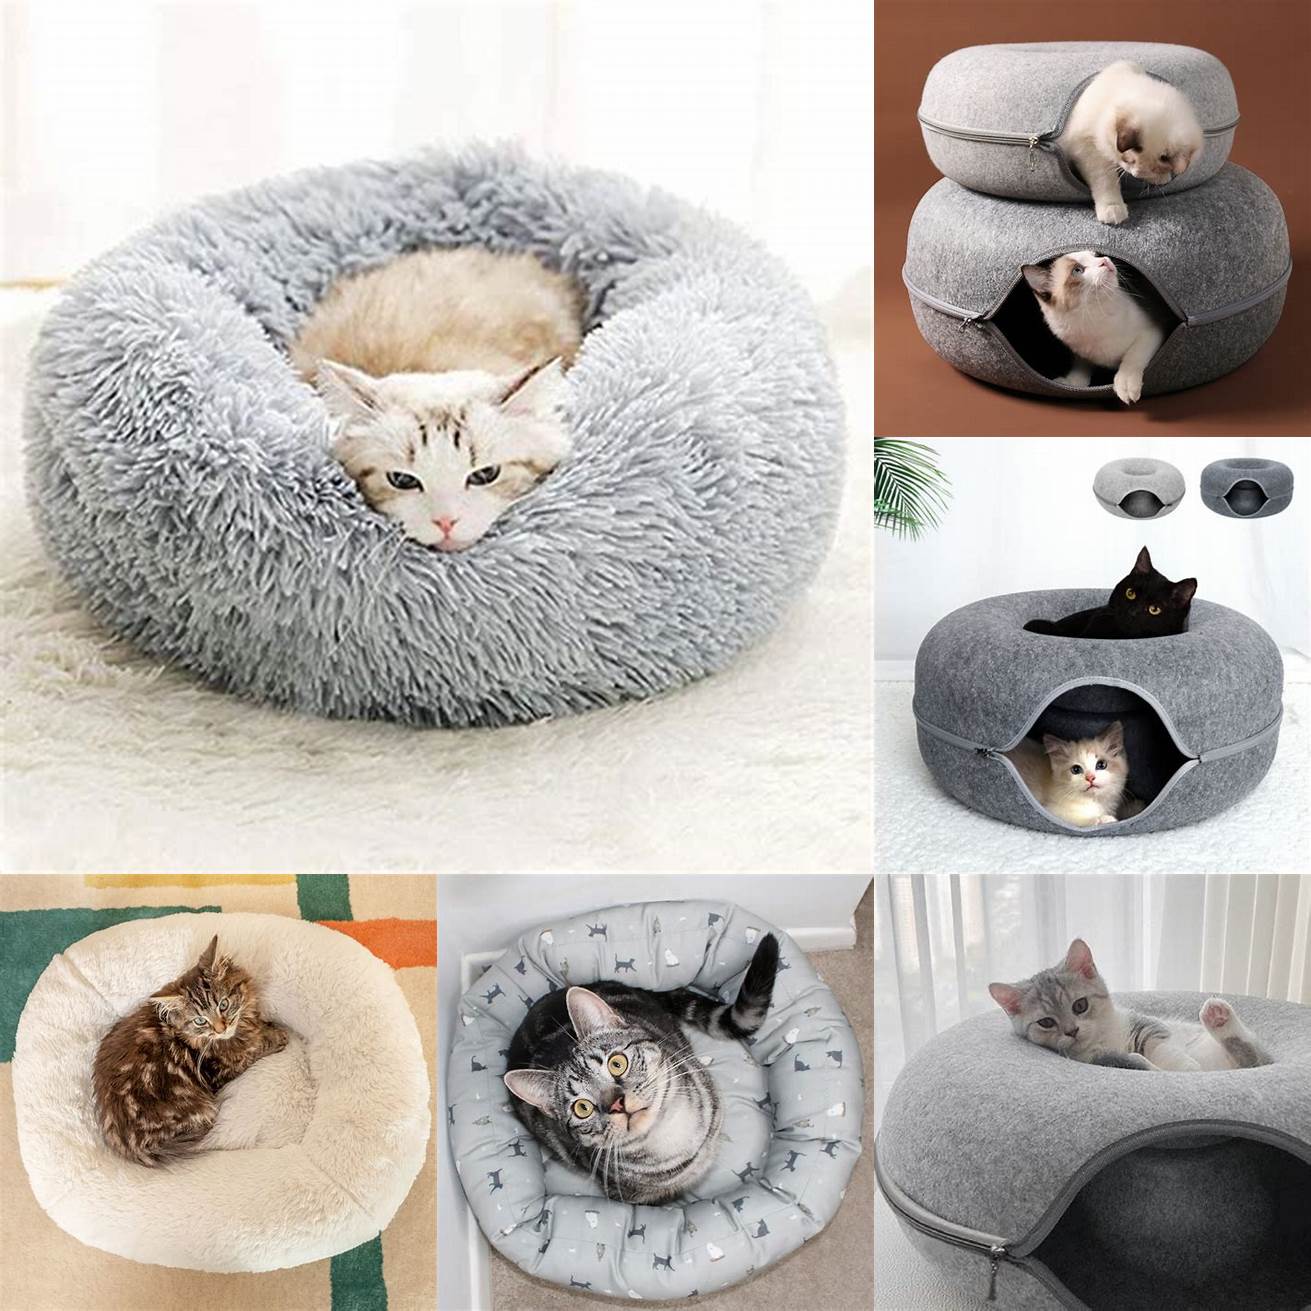 Cat sleeping in a donut bed